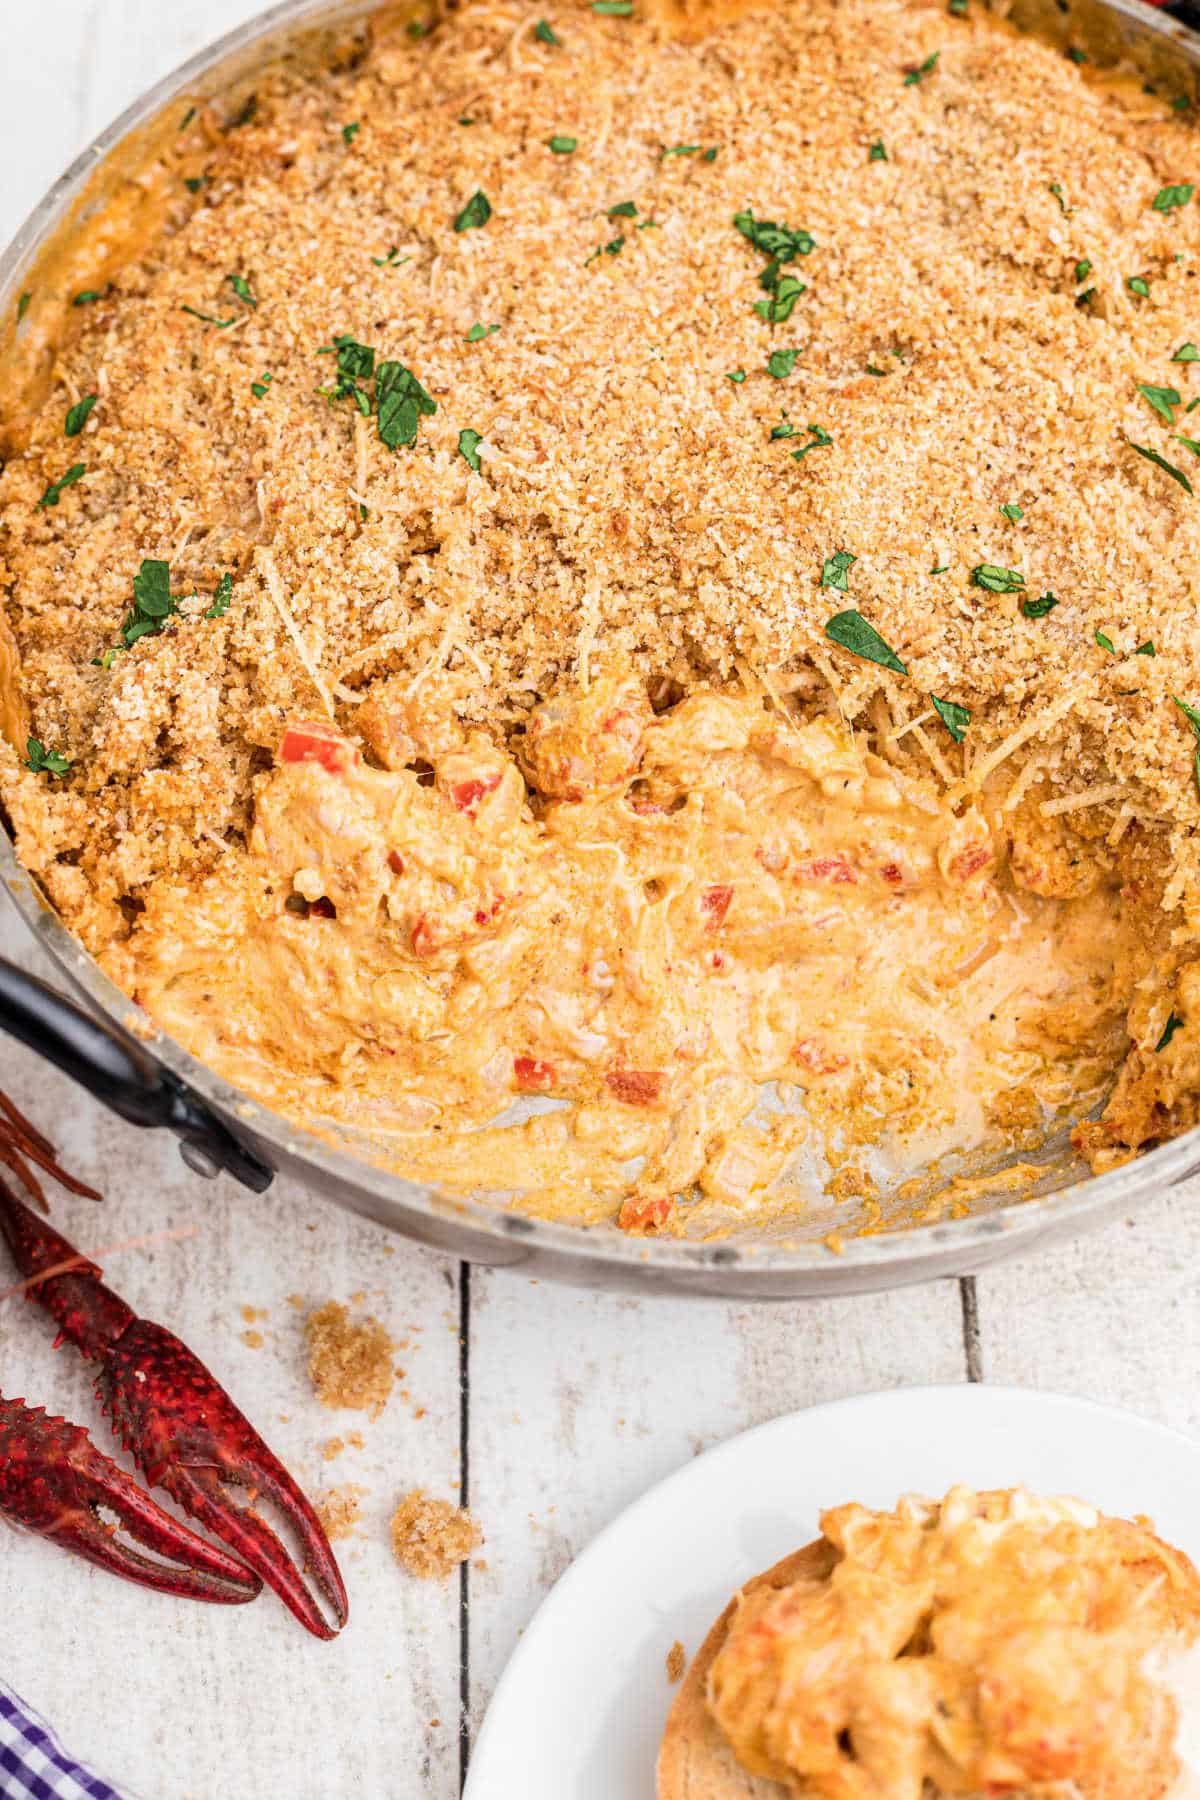 large skillet full of crawfish dip with breadcrumbs on the top, a very cheesy dip. with boiled crawfish in the corners.